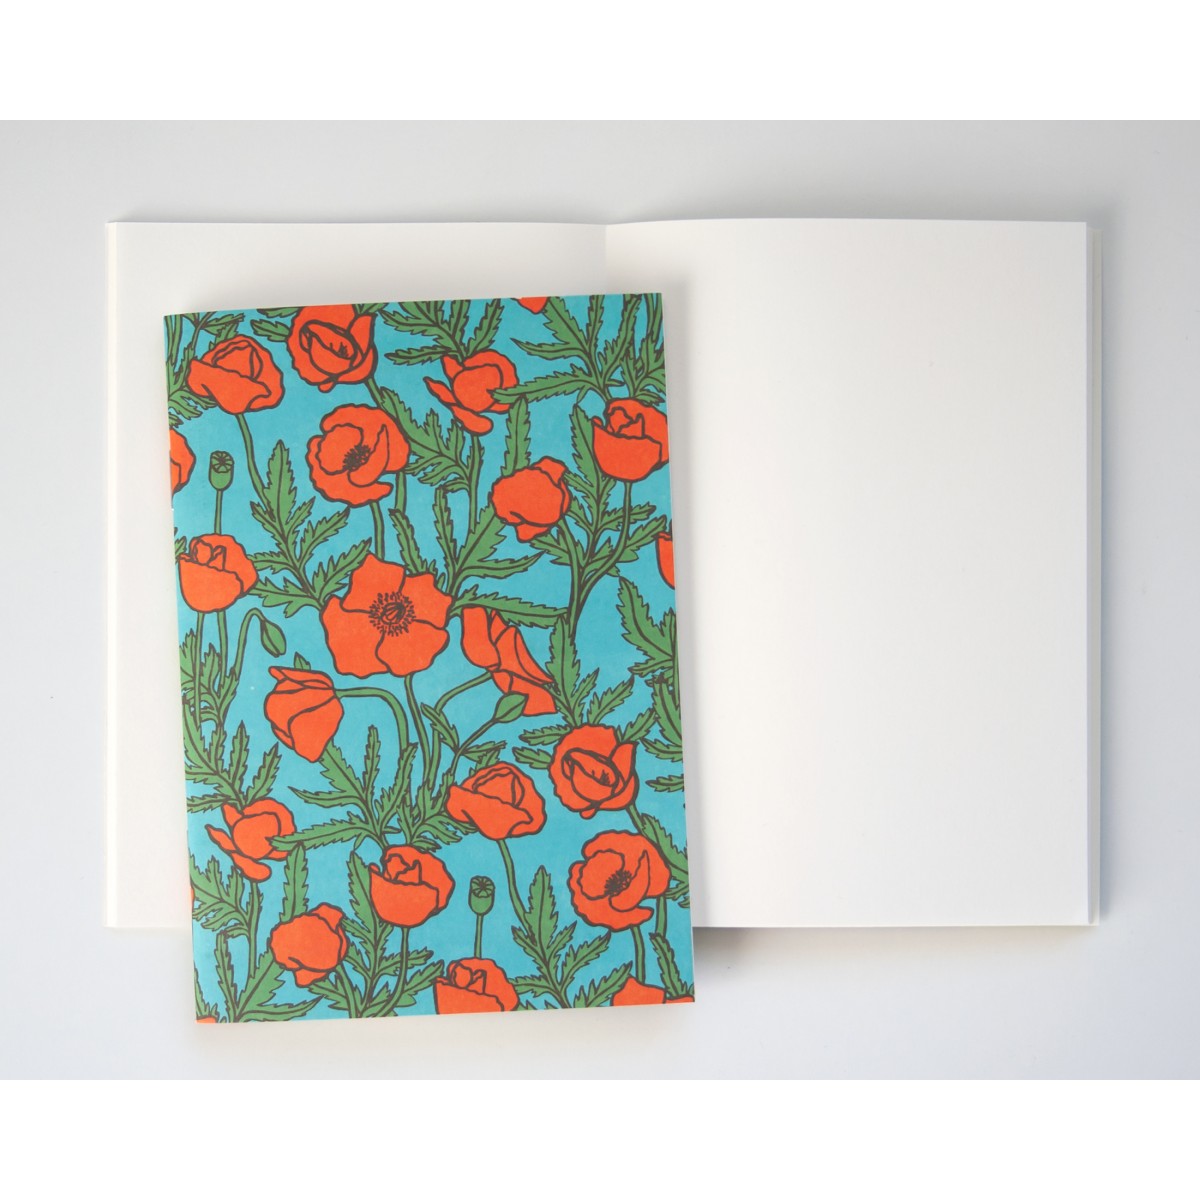 Notizheft A6 mit Mohnmuster // Papaya paper products